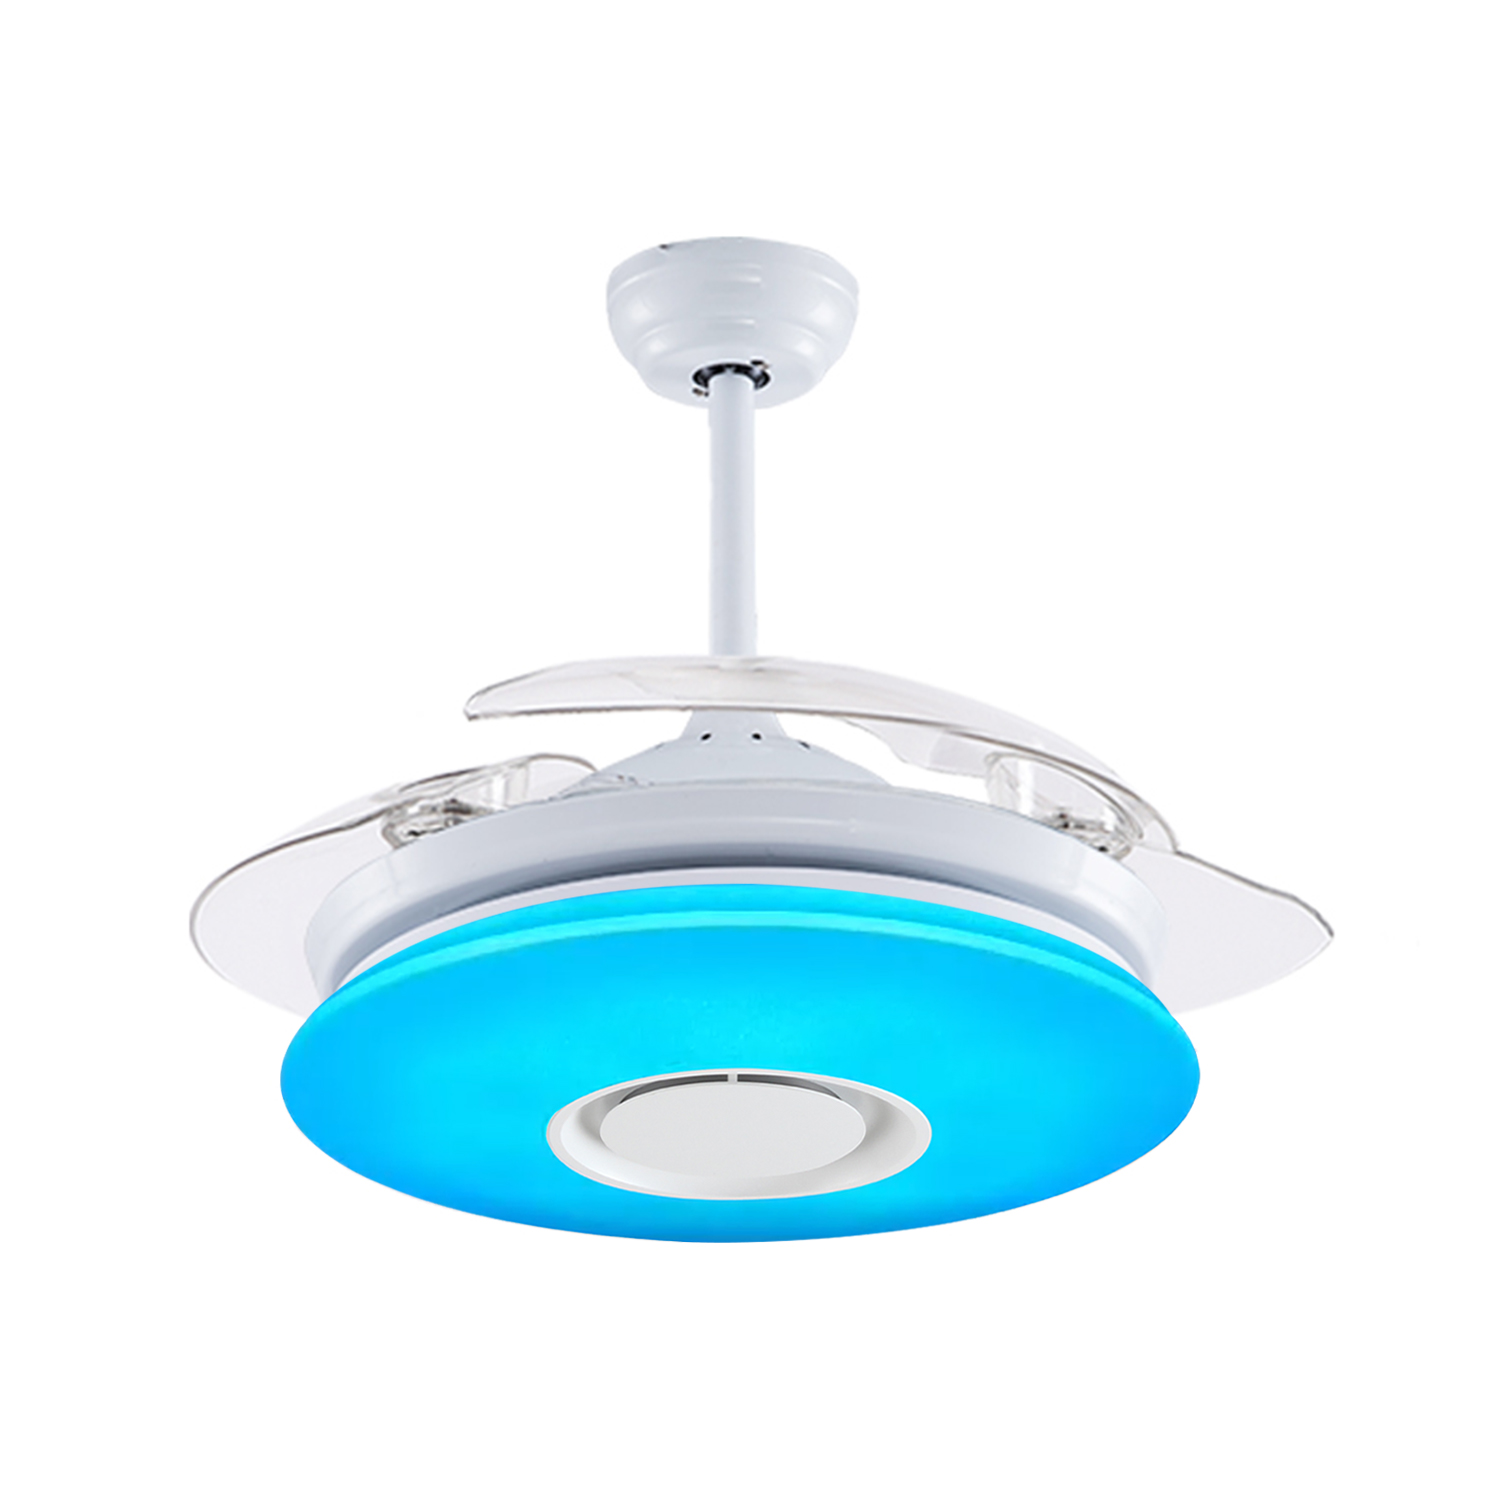 Indoor Modern White Wifi Invisible Retractable Tuya Dc Bldc Remote Control RGB Smart Ceiling Fan Light with Speaker